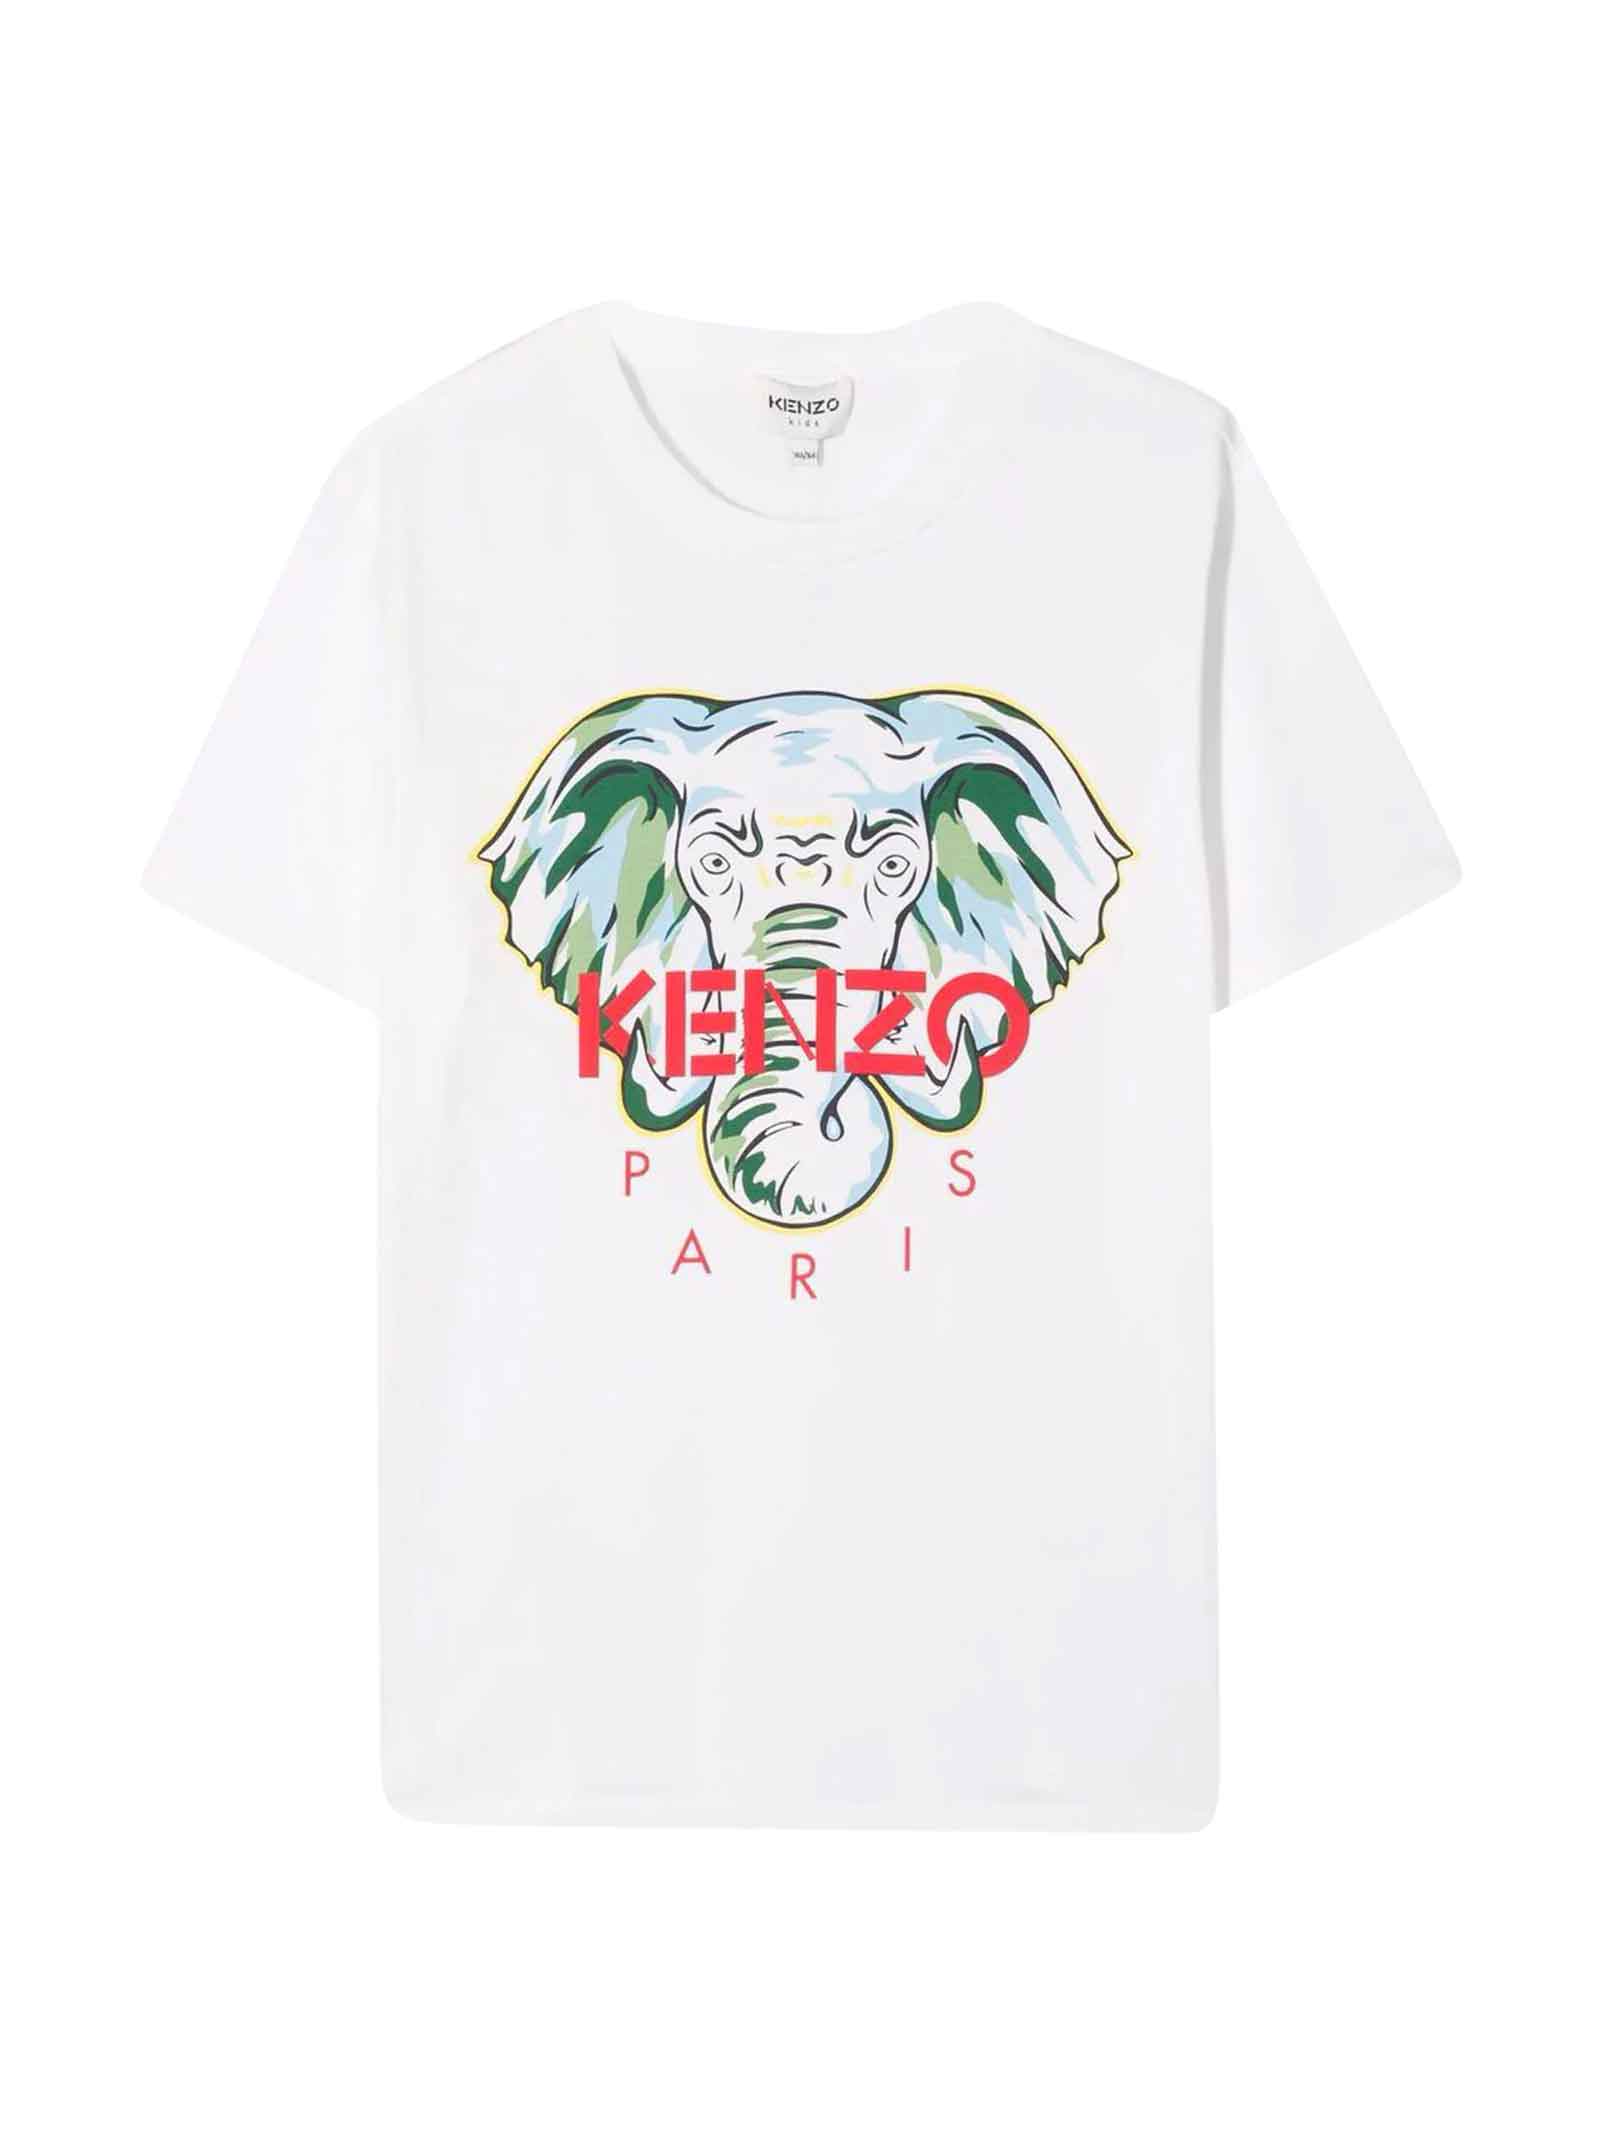 Kenzo Kids Unisex White T-shirt With Elephant Print With Logo On The Front, Round Neckline, Short Sleeves And Straight Hem By